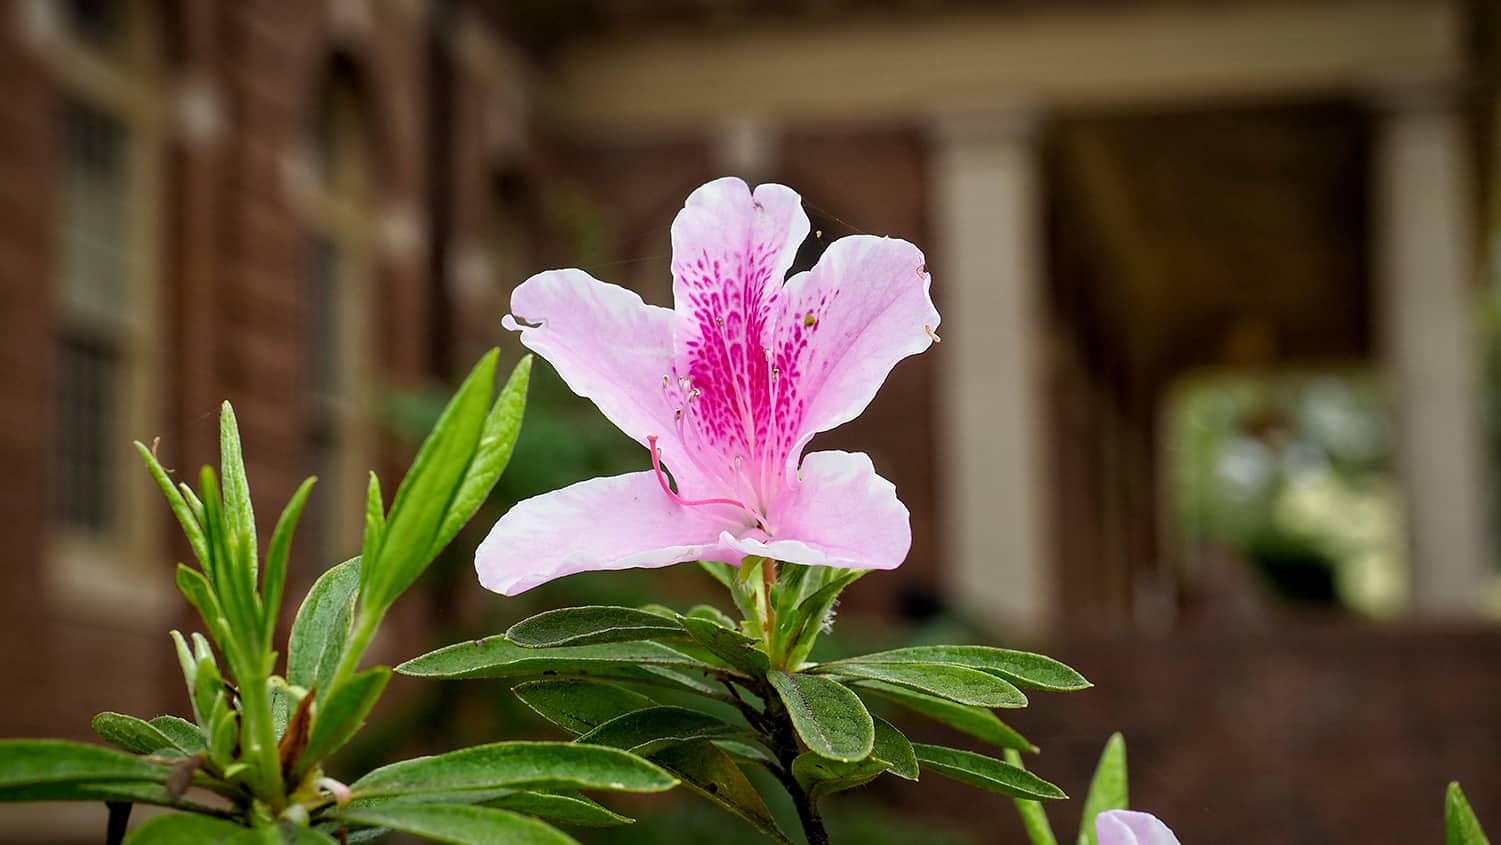 A blooming pink lily on a spring day near Mary Yarbrough Court.